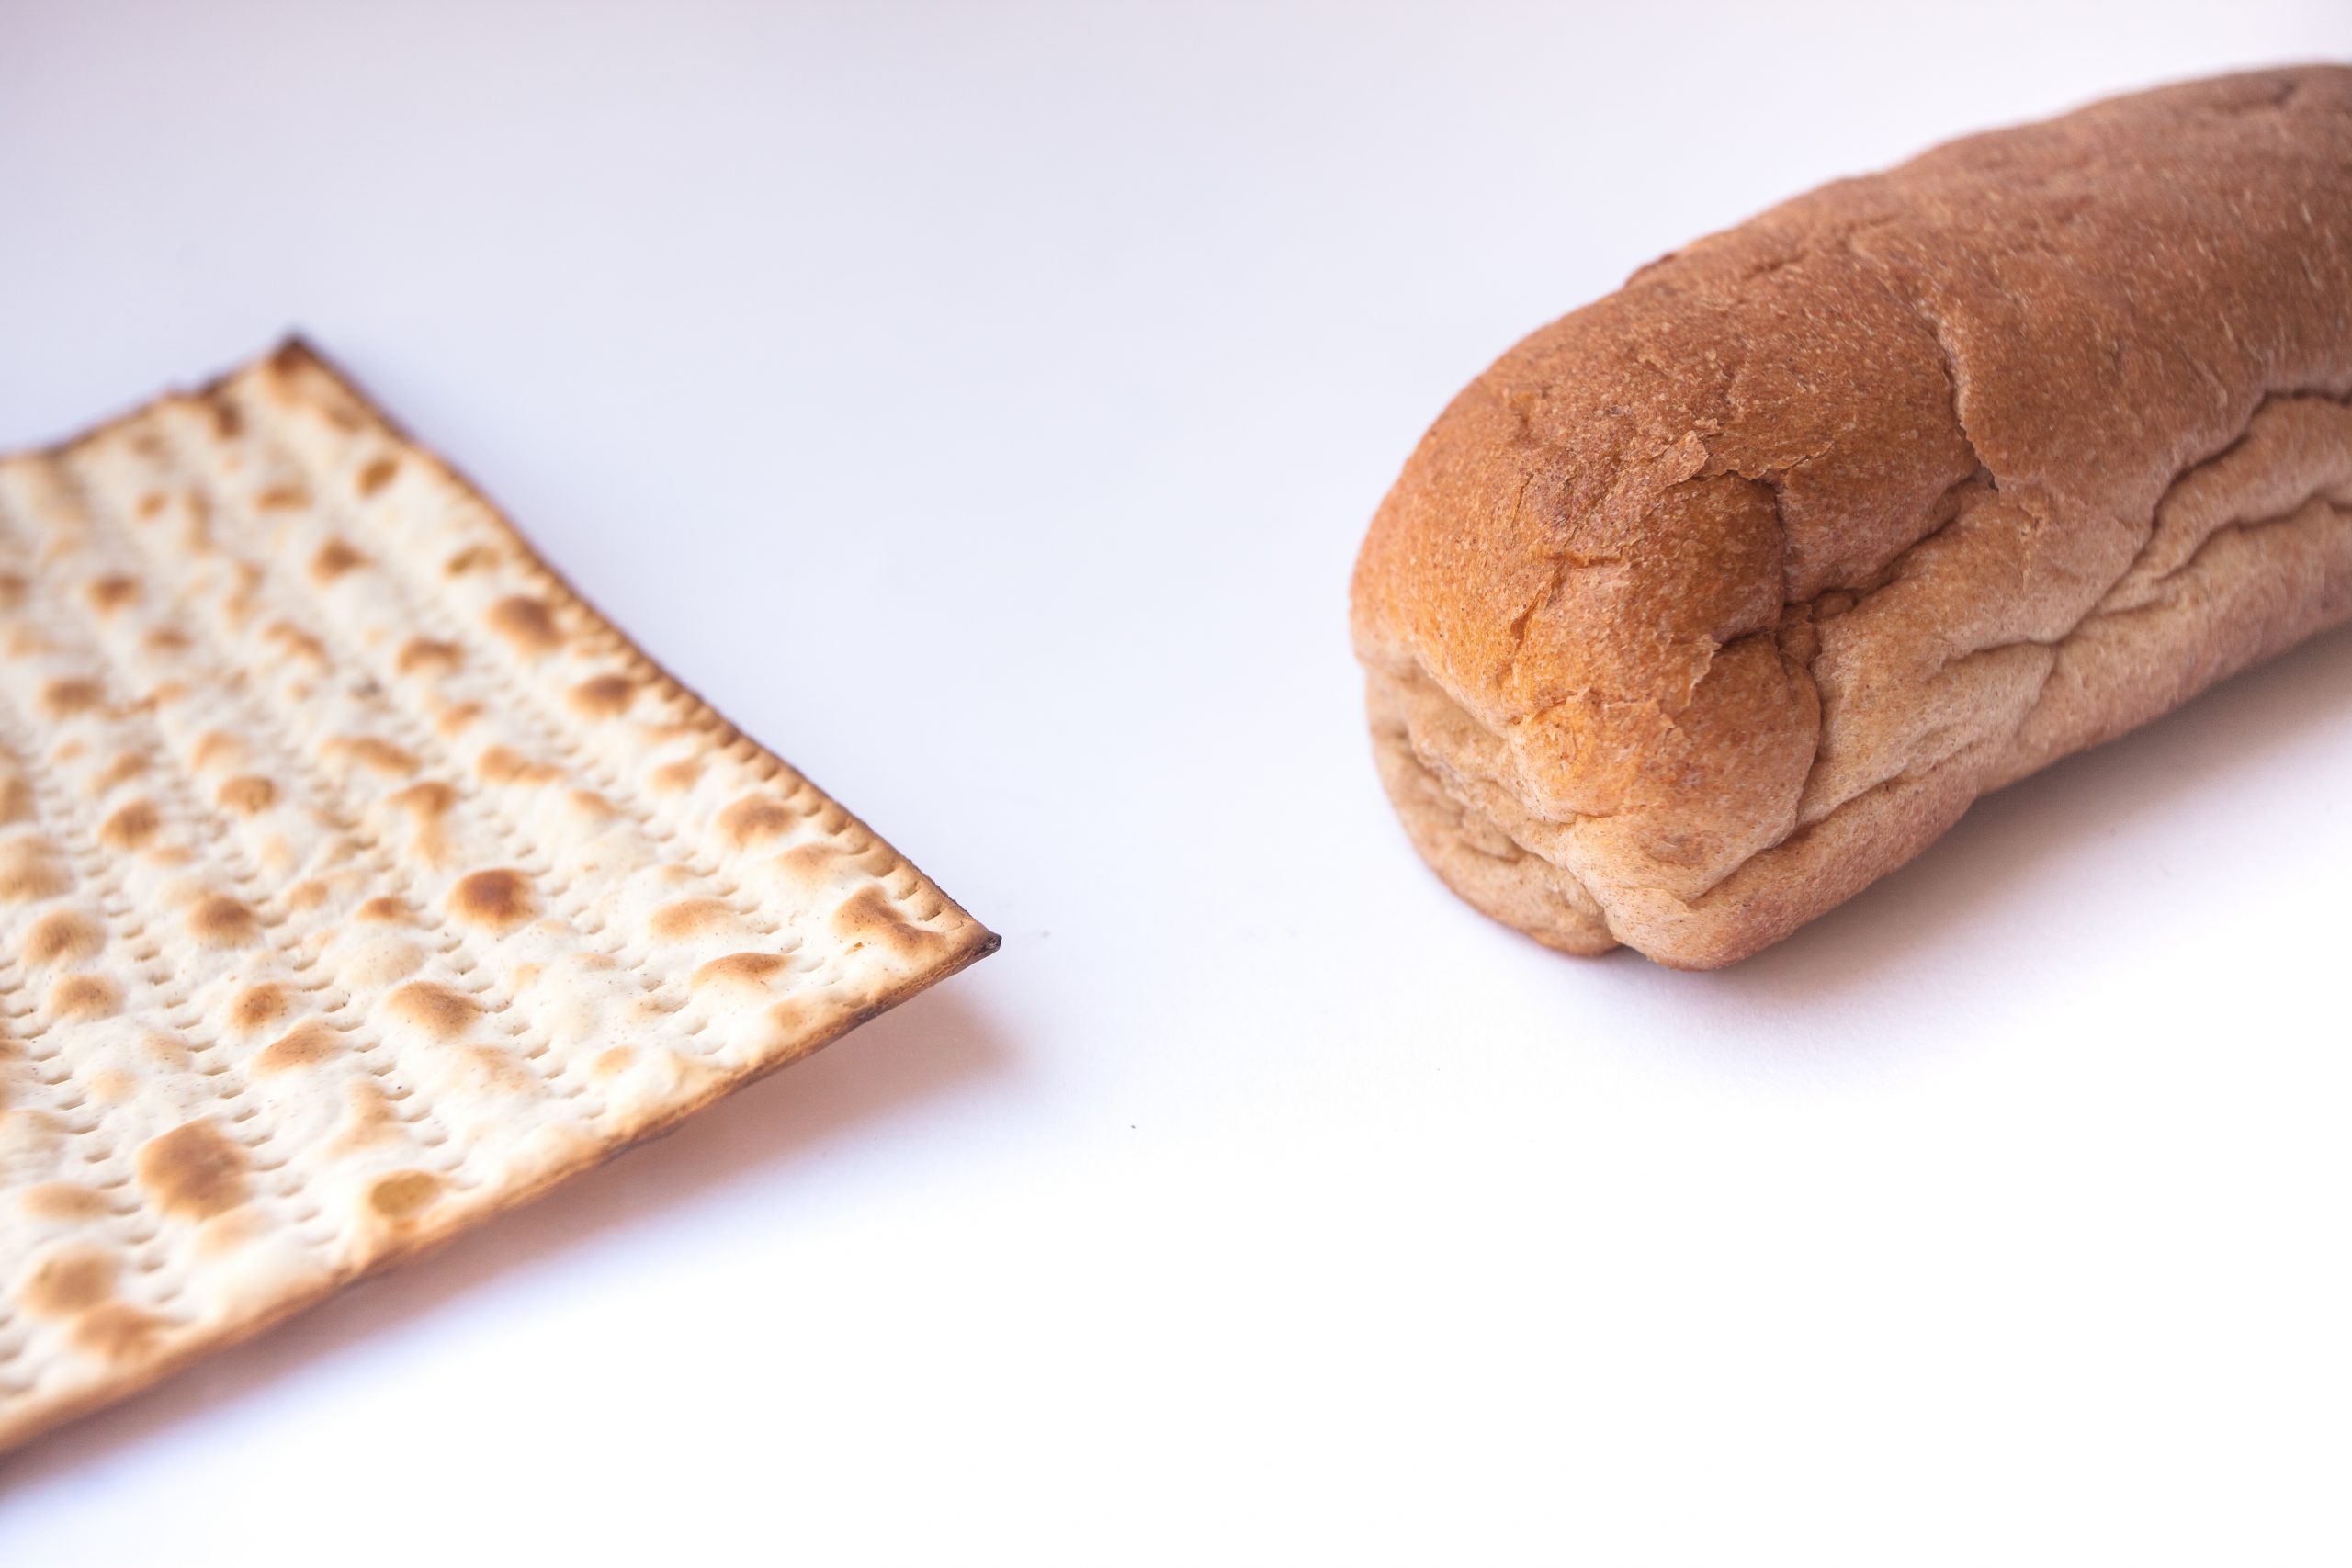 Erev Pesach on Shabbat: What to Eat?